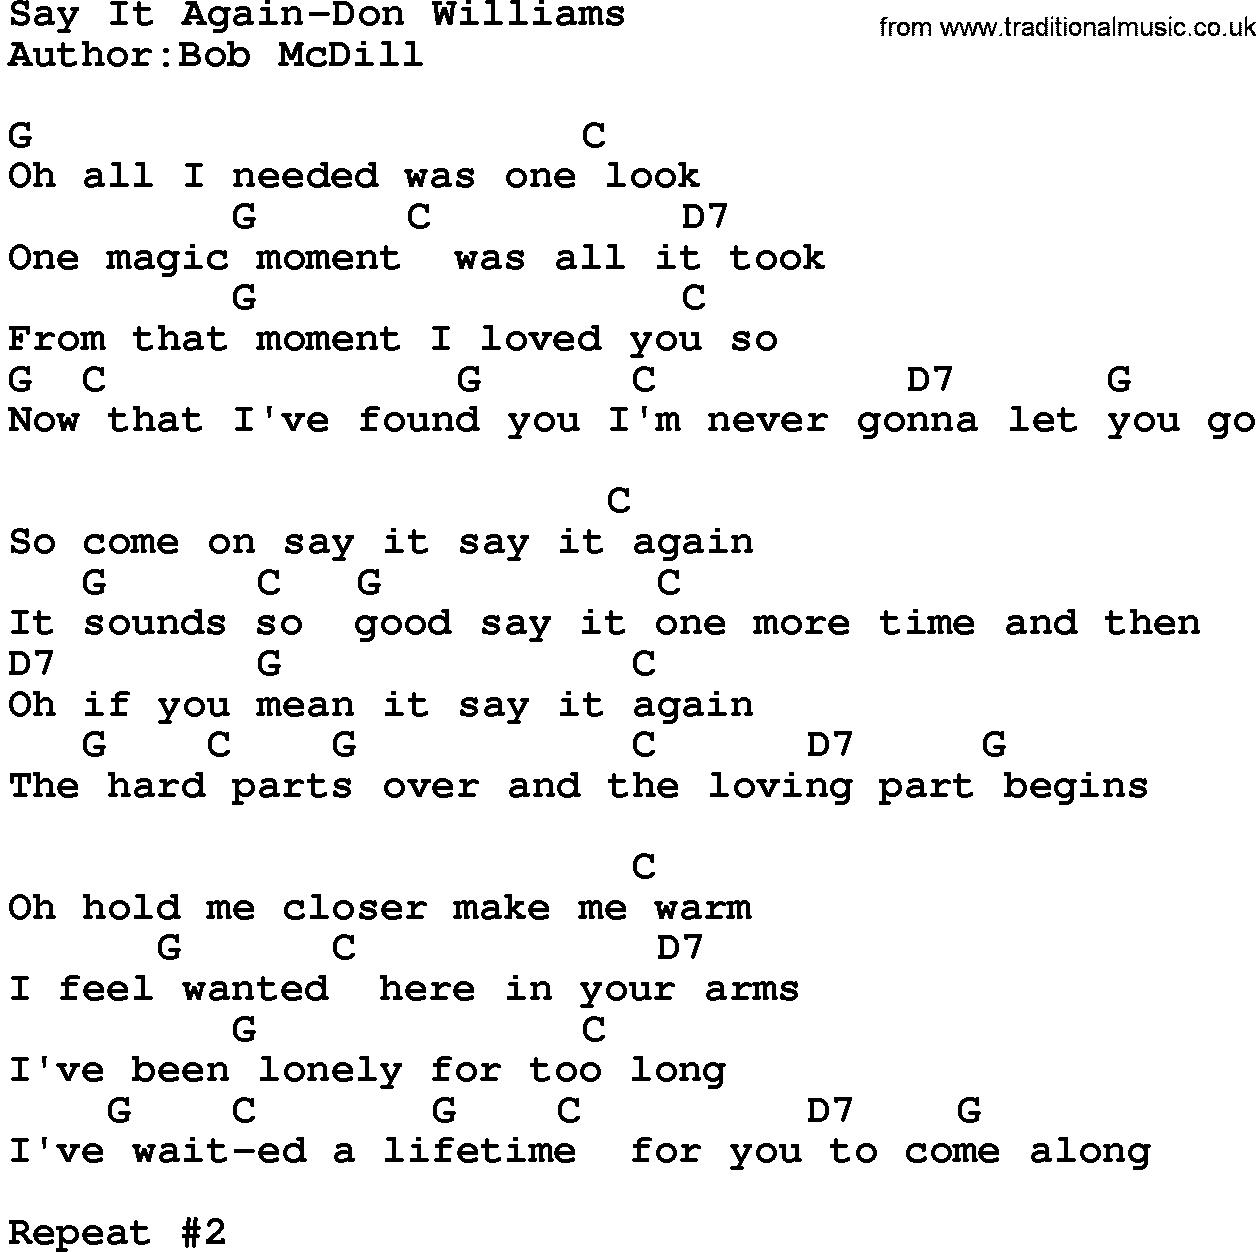 Country music song: Say It Again-Don Williams lyrics and chords